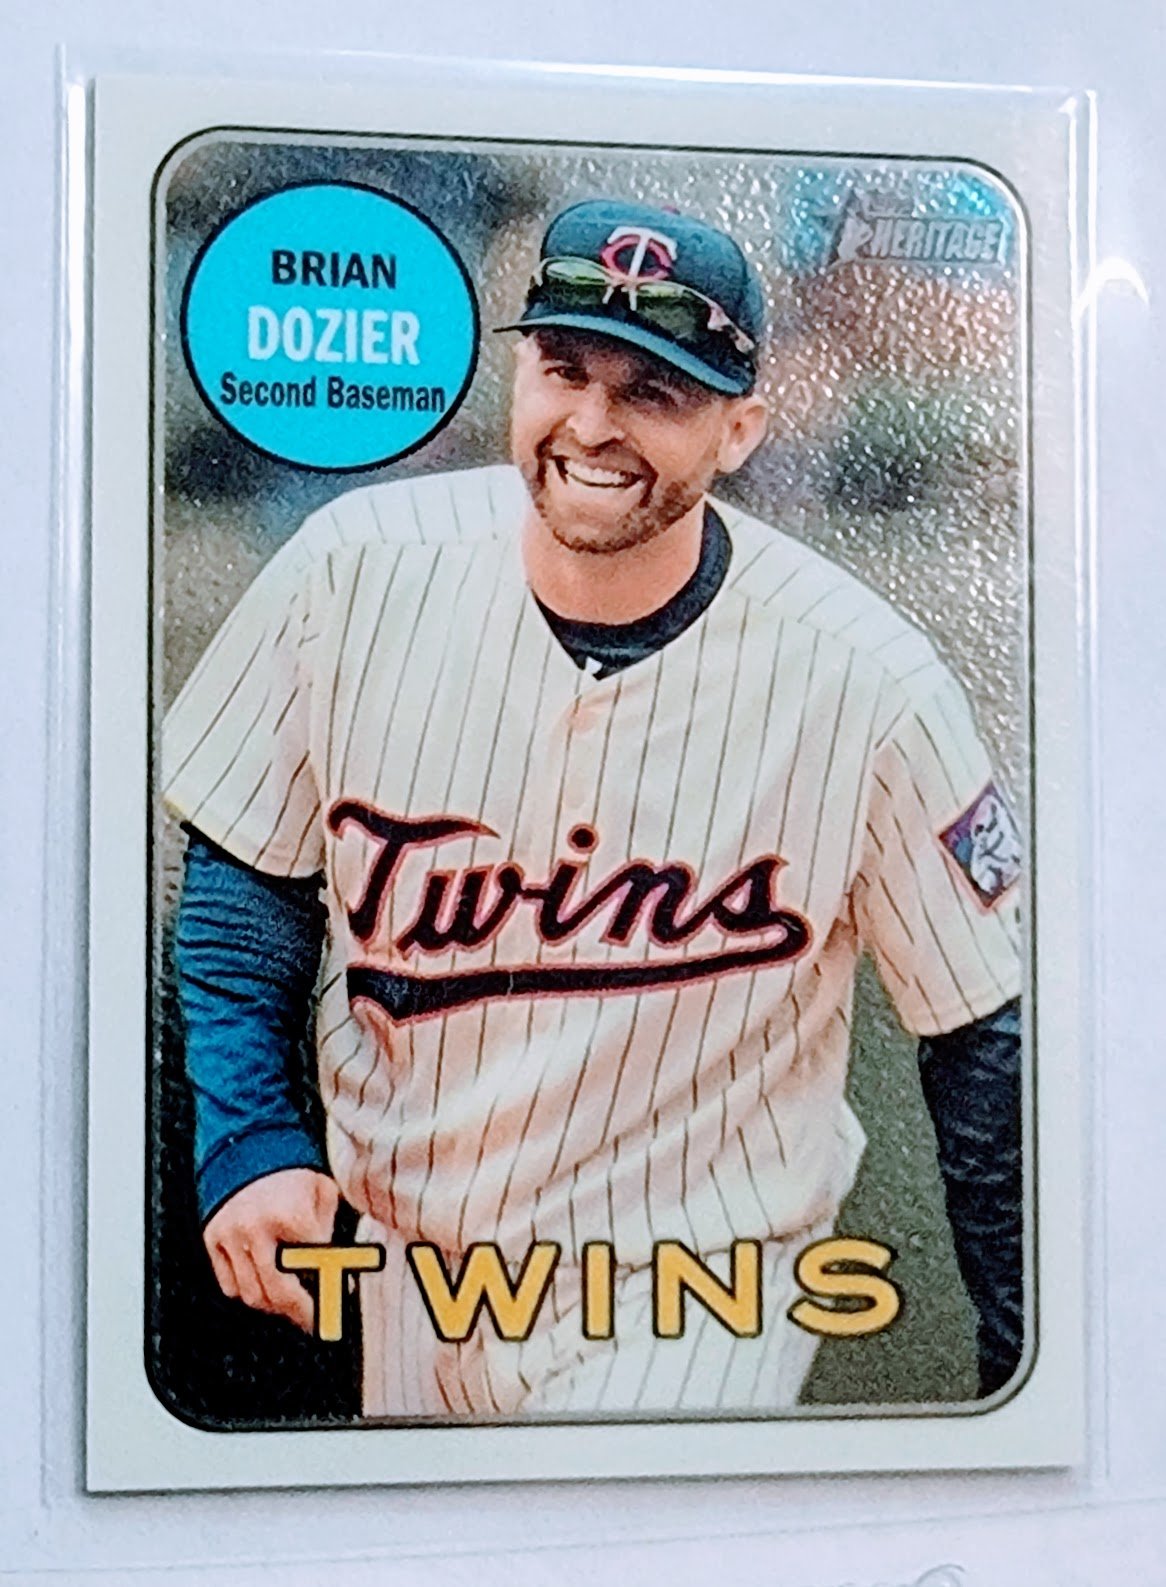 2018 Topps Heritage Brian Dozier Chrome #'d/999 Insert Baseball Card TPTV simple Xclusive Collectibles   